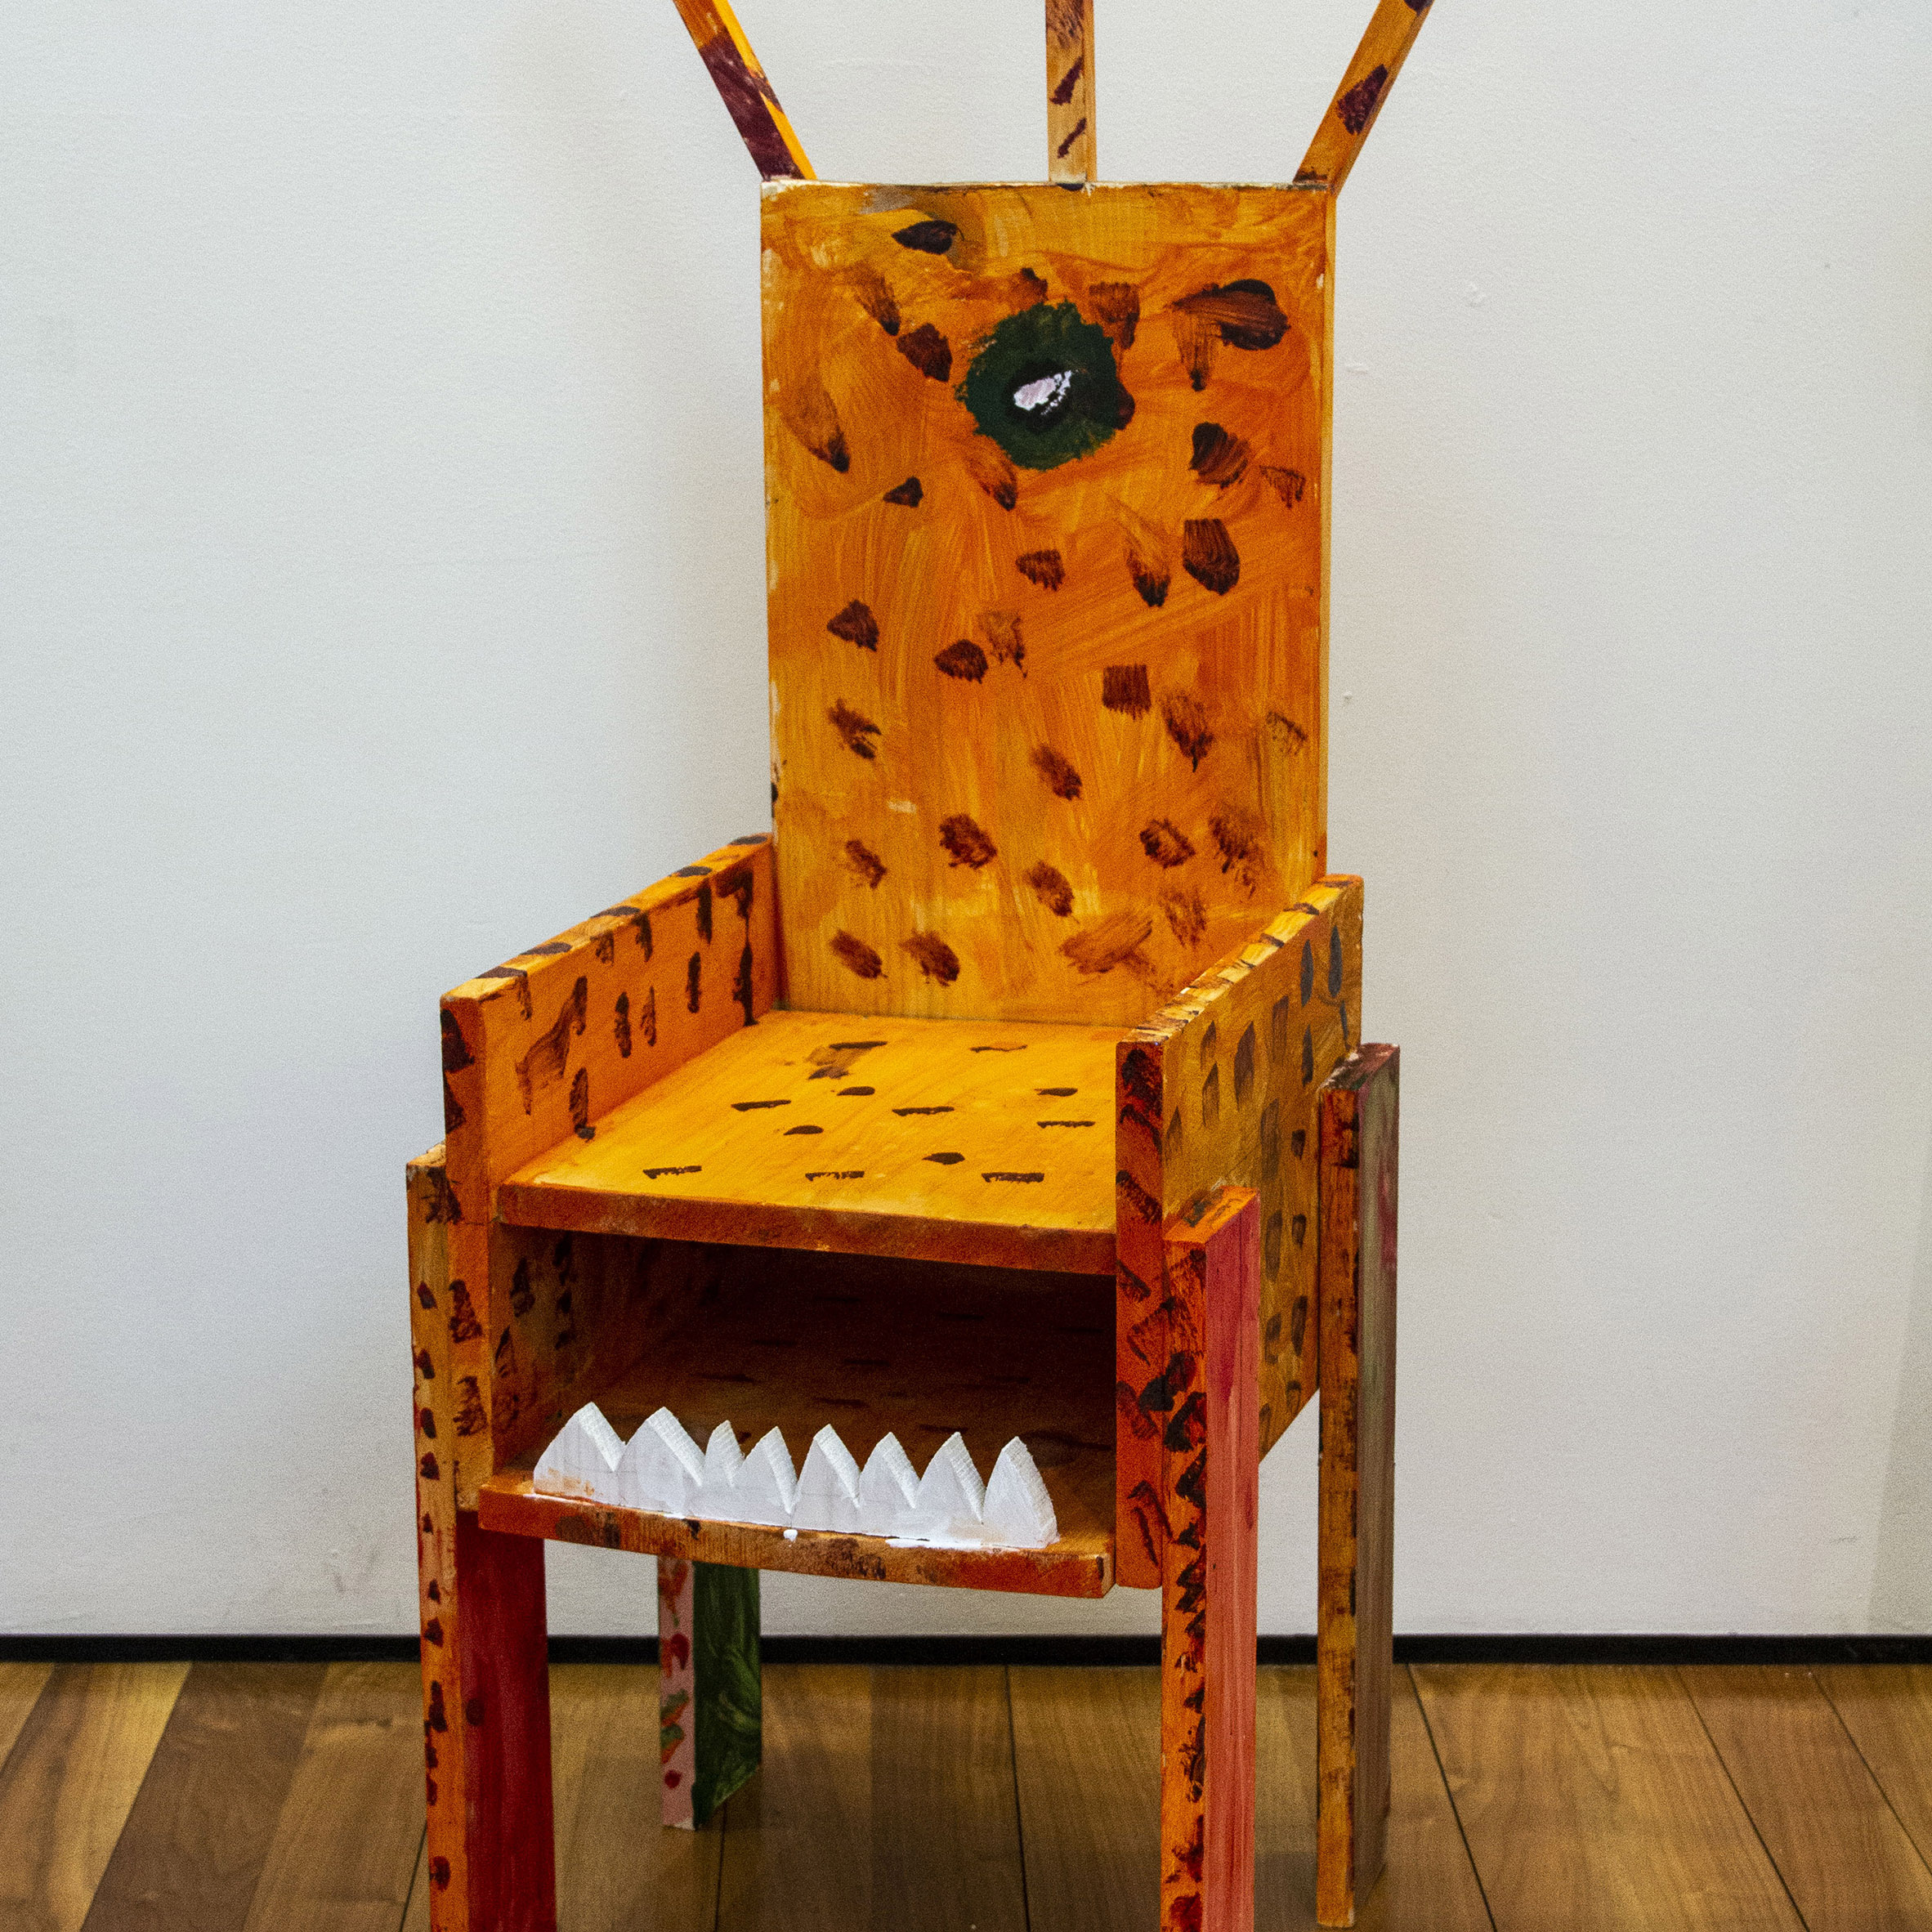 Primary School Chairs project by Bruce Edelstein and Trinity School